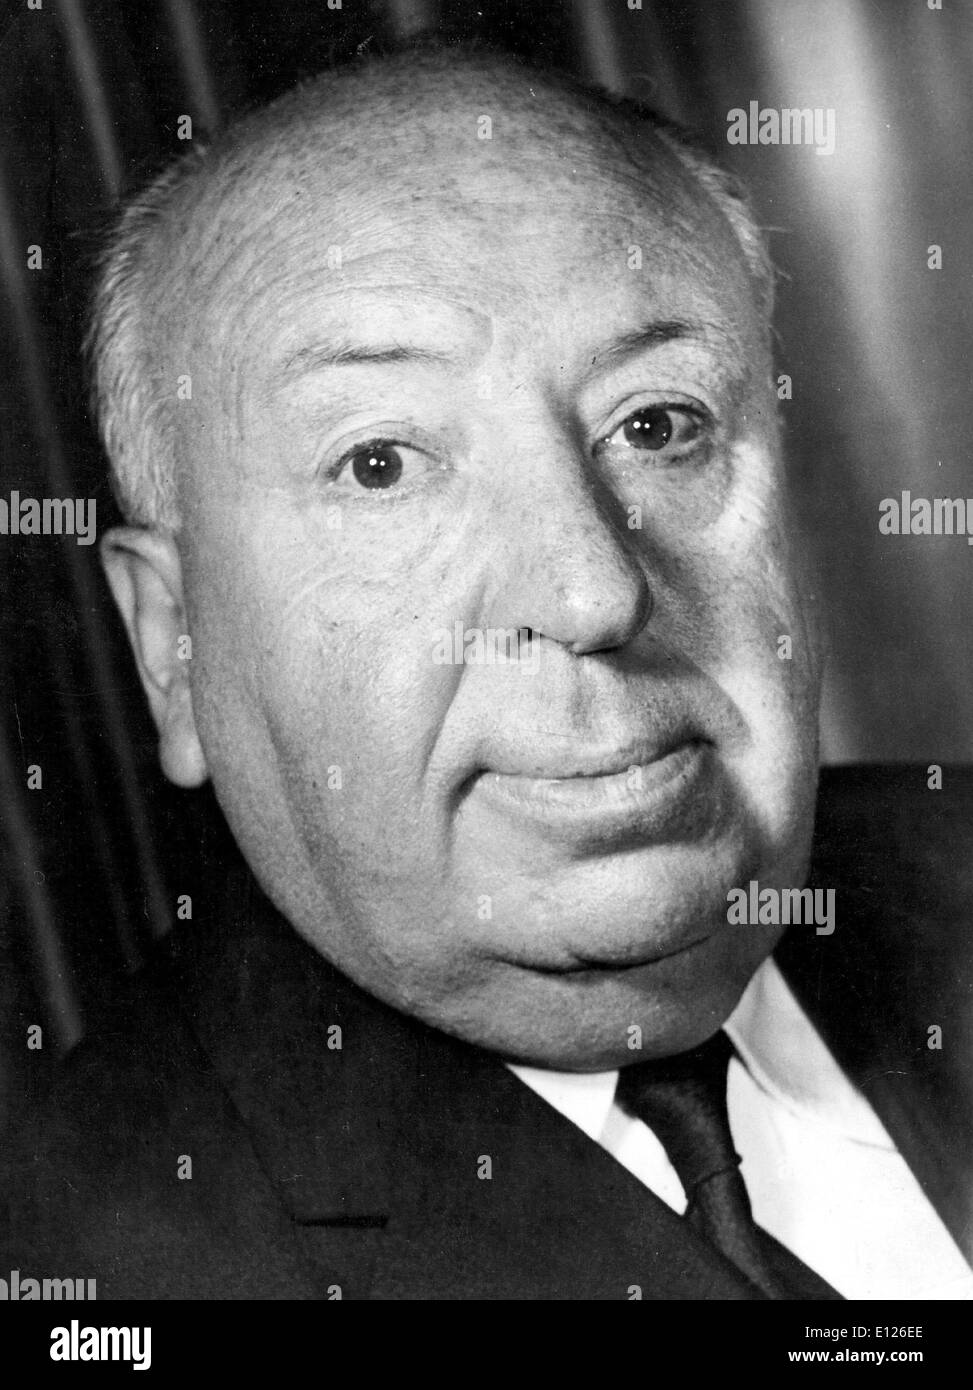 Feb 04, 2008 - Berlin, GERMANY - The acknowledged master of the thriller genre he virtually invented, ALFRED HITCHCOCK was also Stock Photo